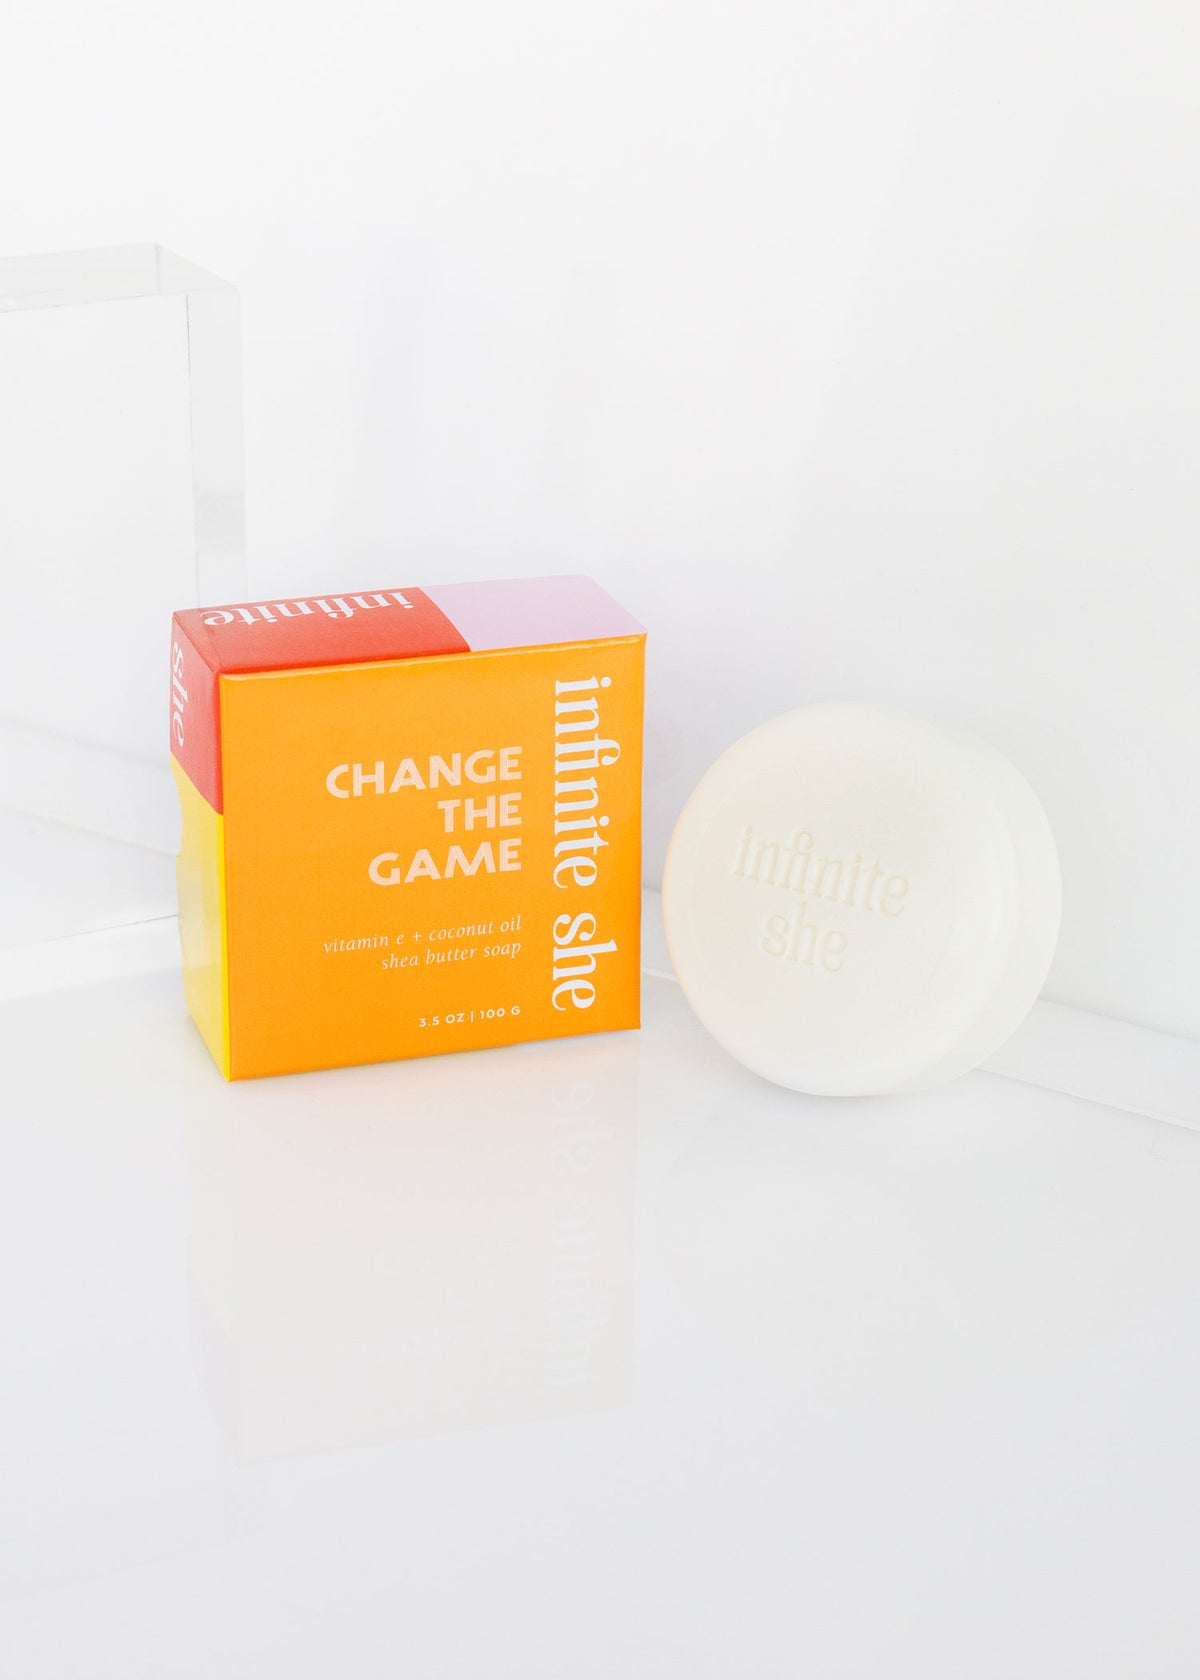 A skincare product packaging labeled "Infinite She Change the Game Shea Butter Soap" next to a round container with "Infinite She" on the lid, set against a clean, white backdrop. The product contains Coconut Oil.